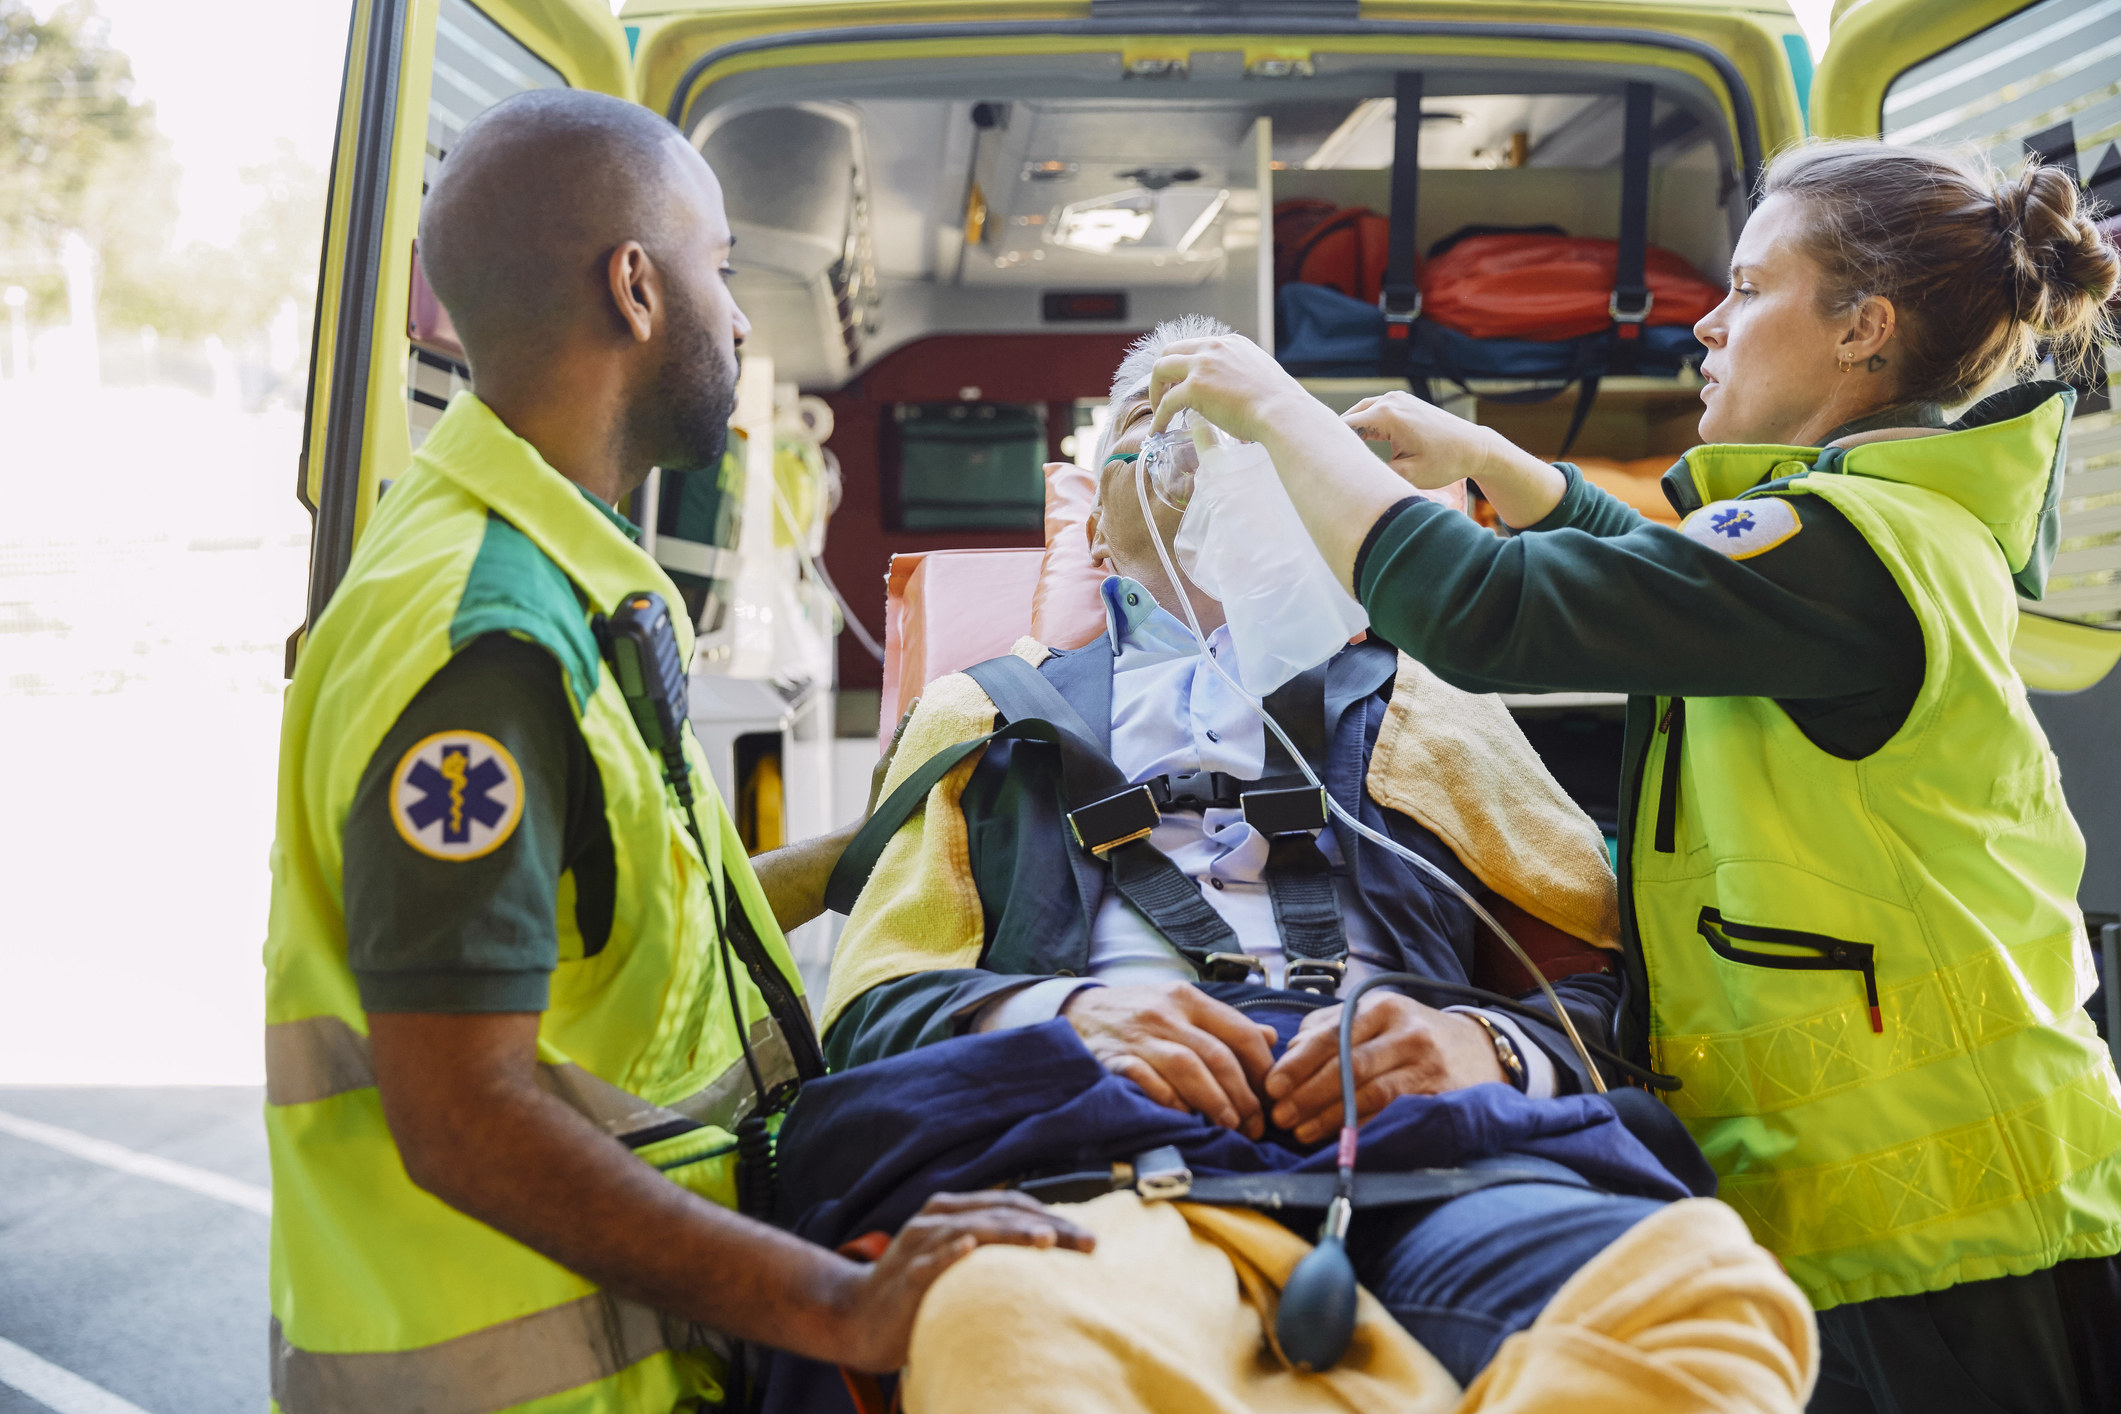 Paramedics working with a patient